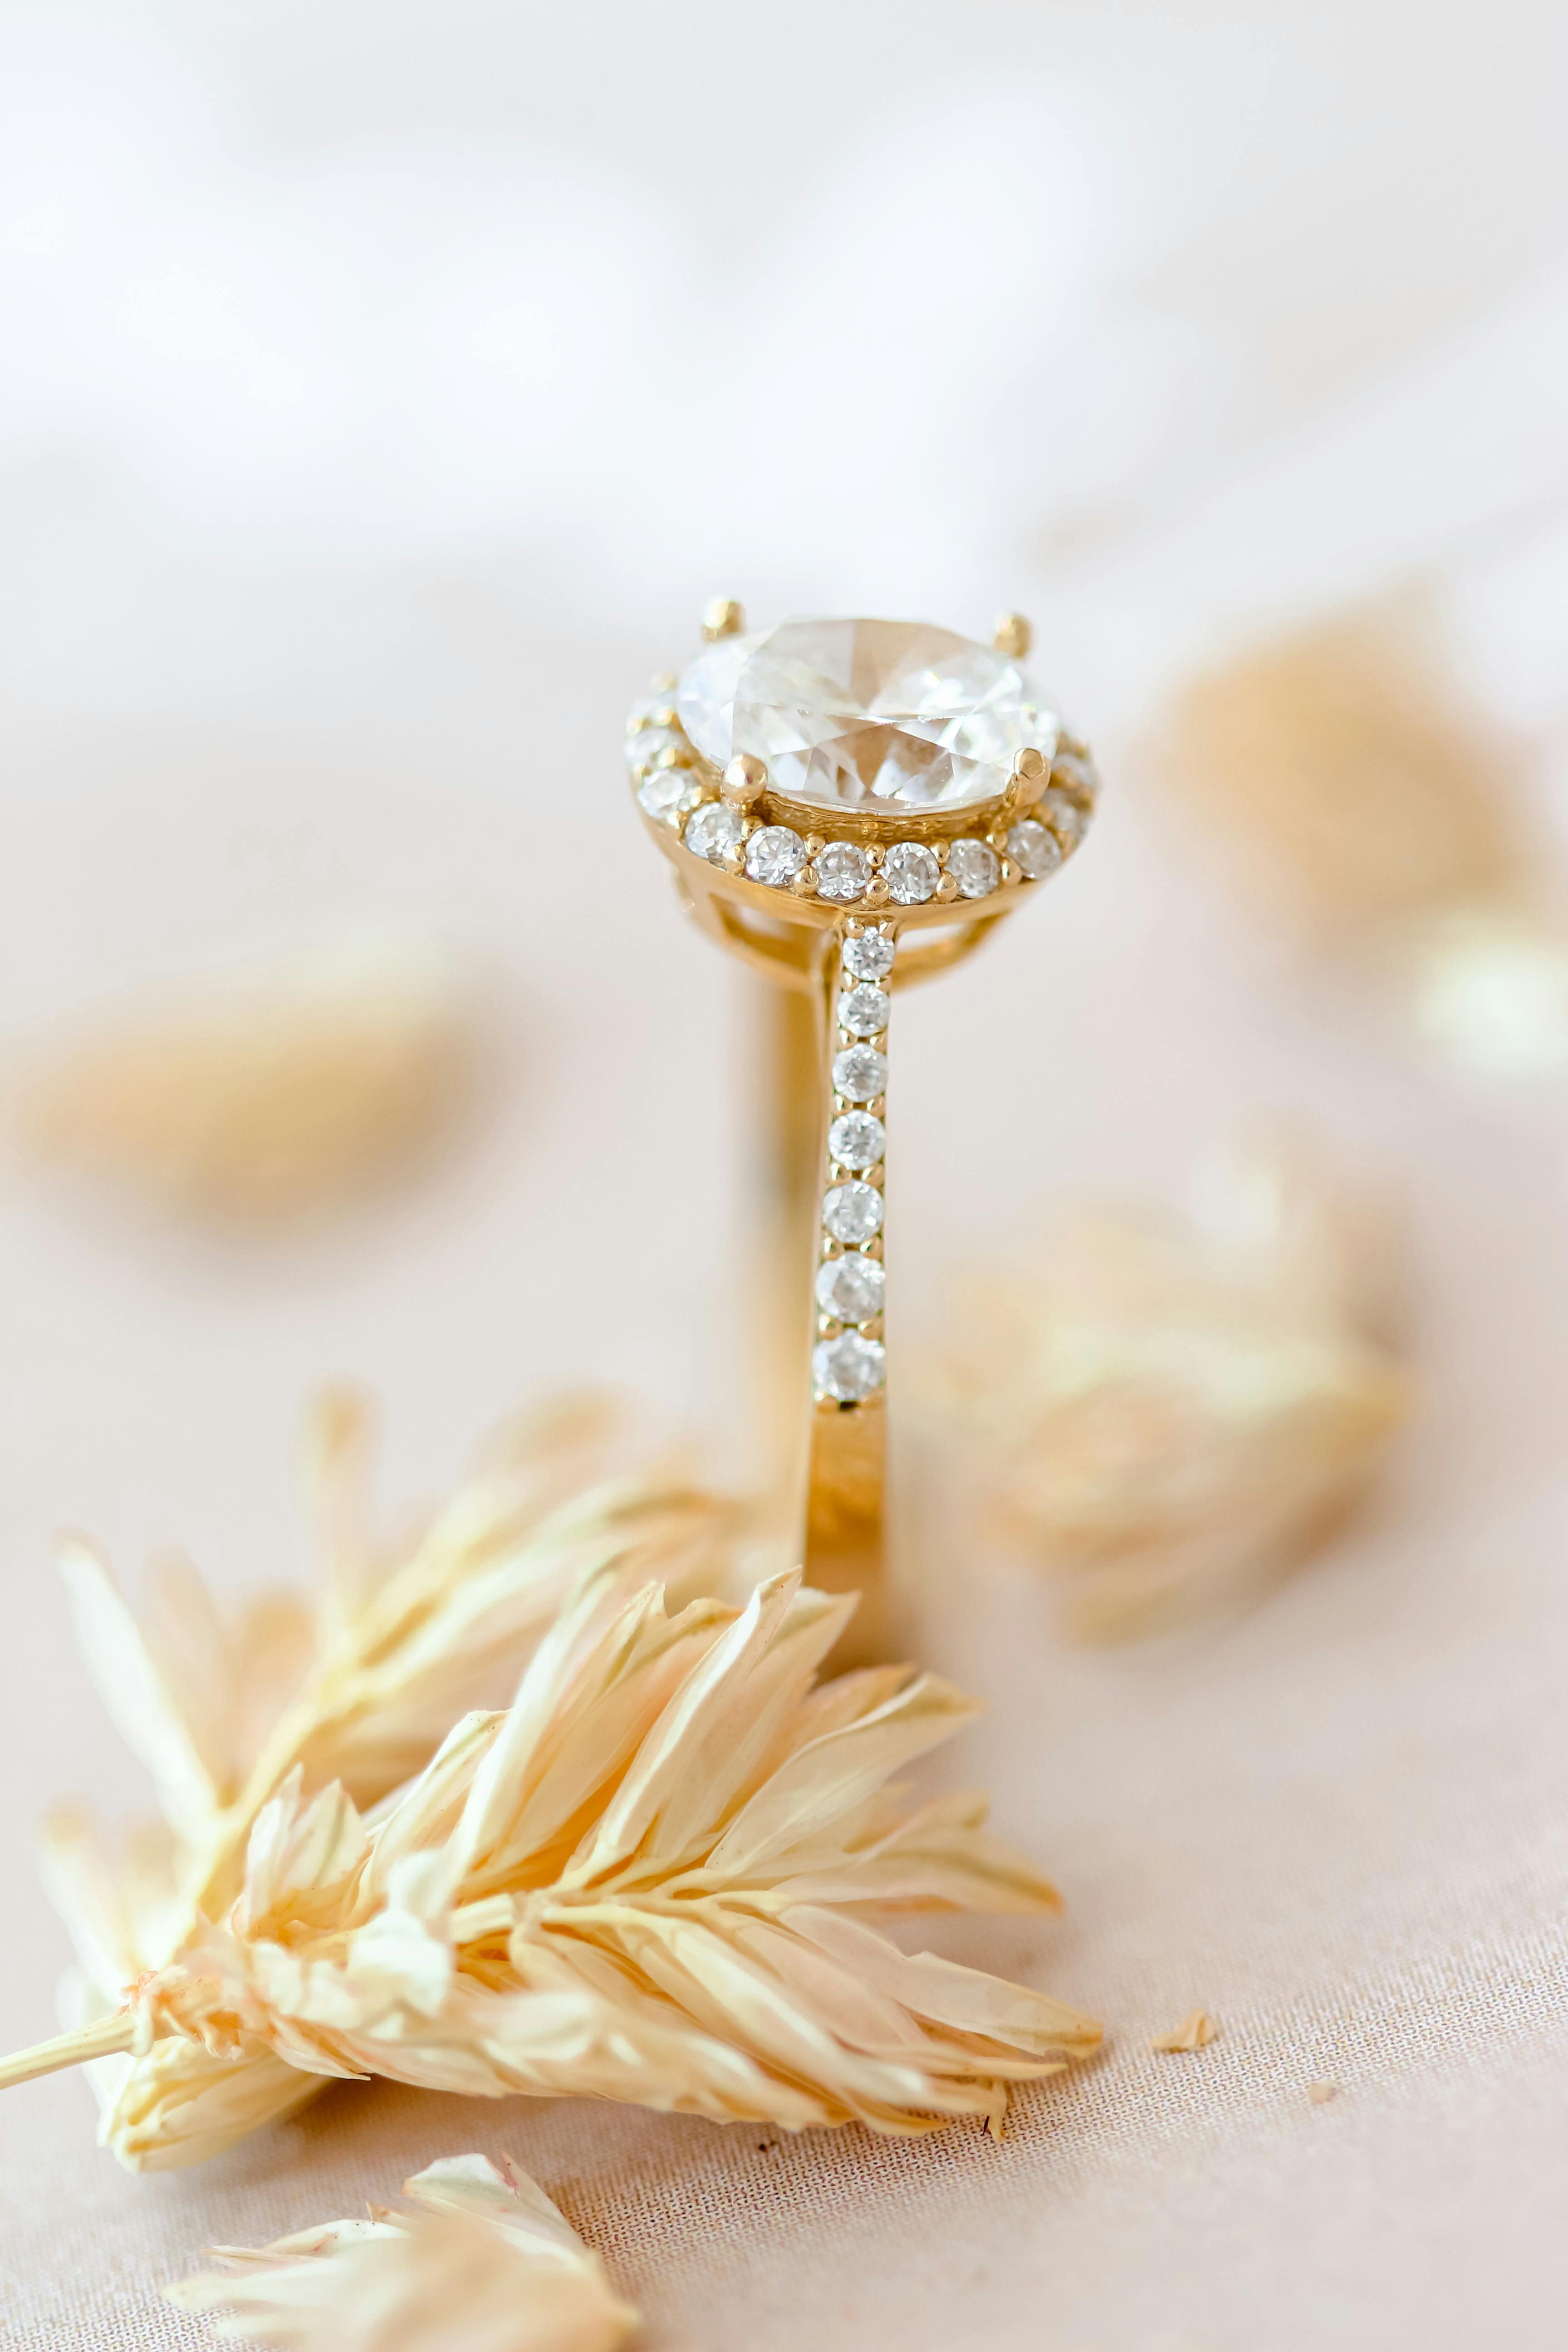 A yellow gold diamond ring | Source: Pexels